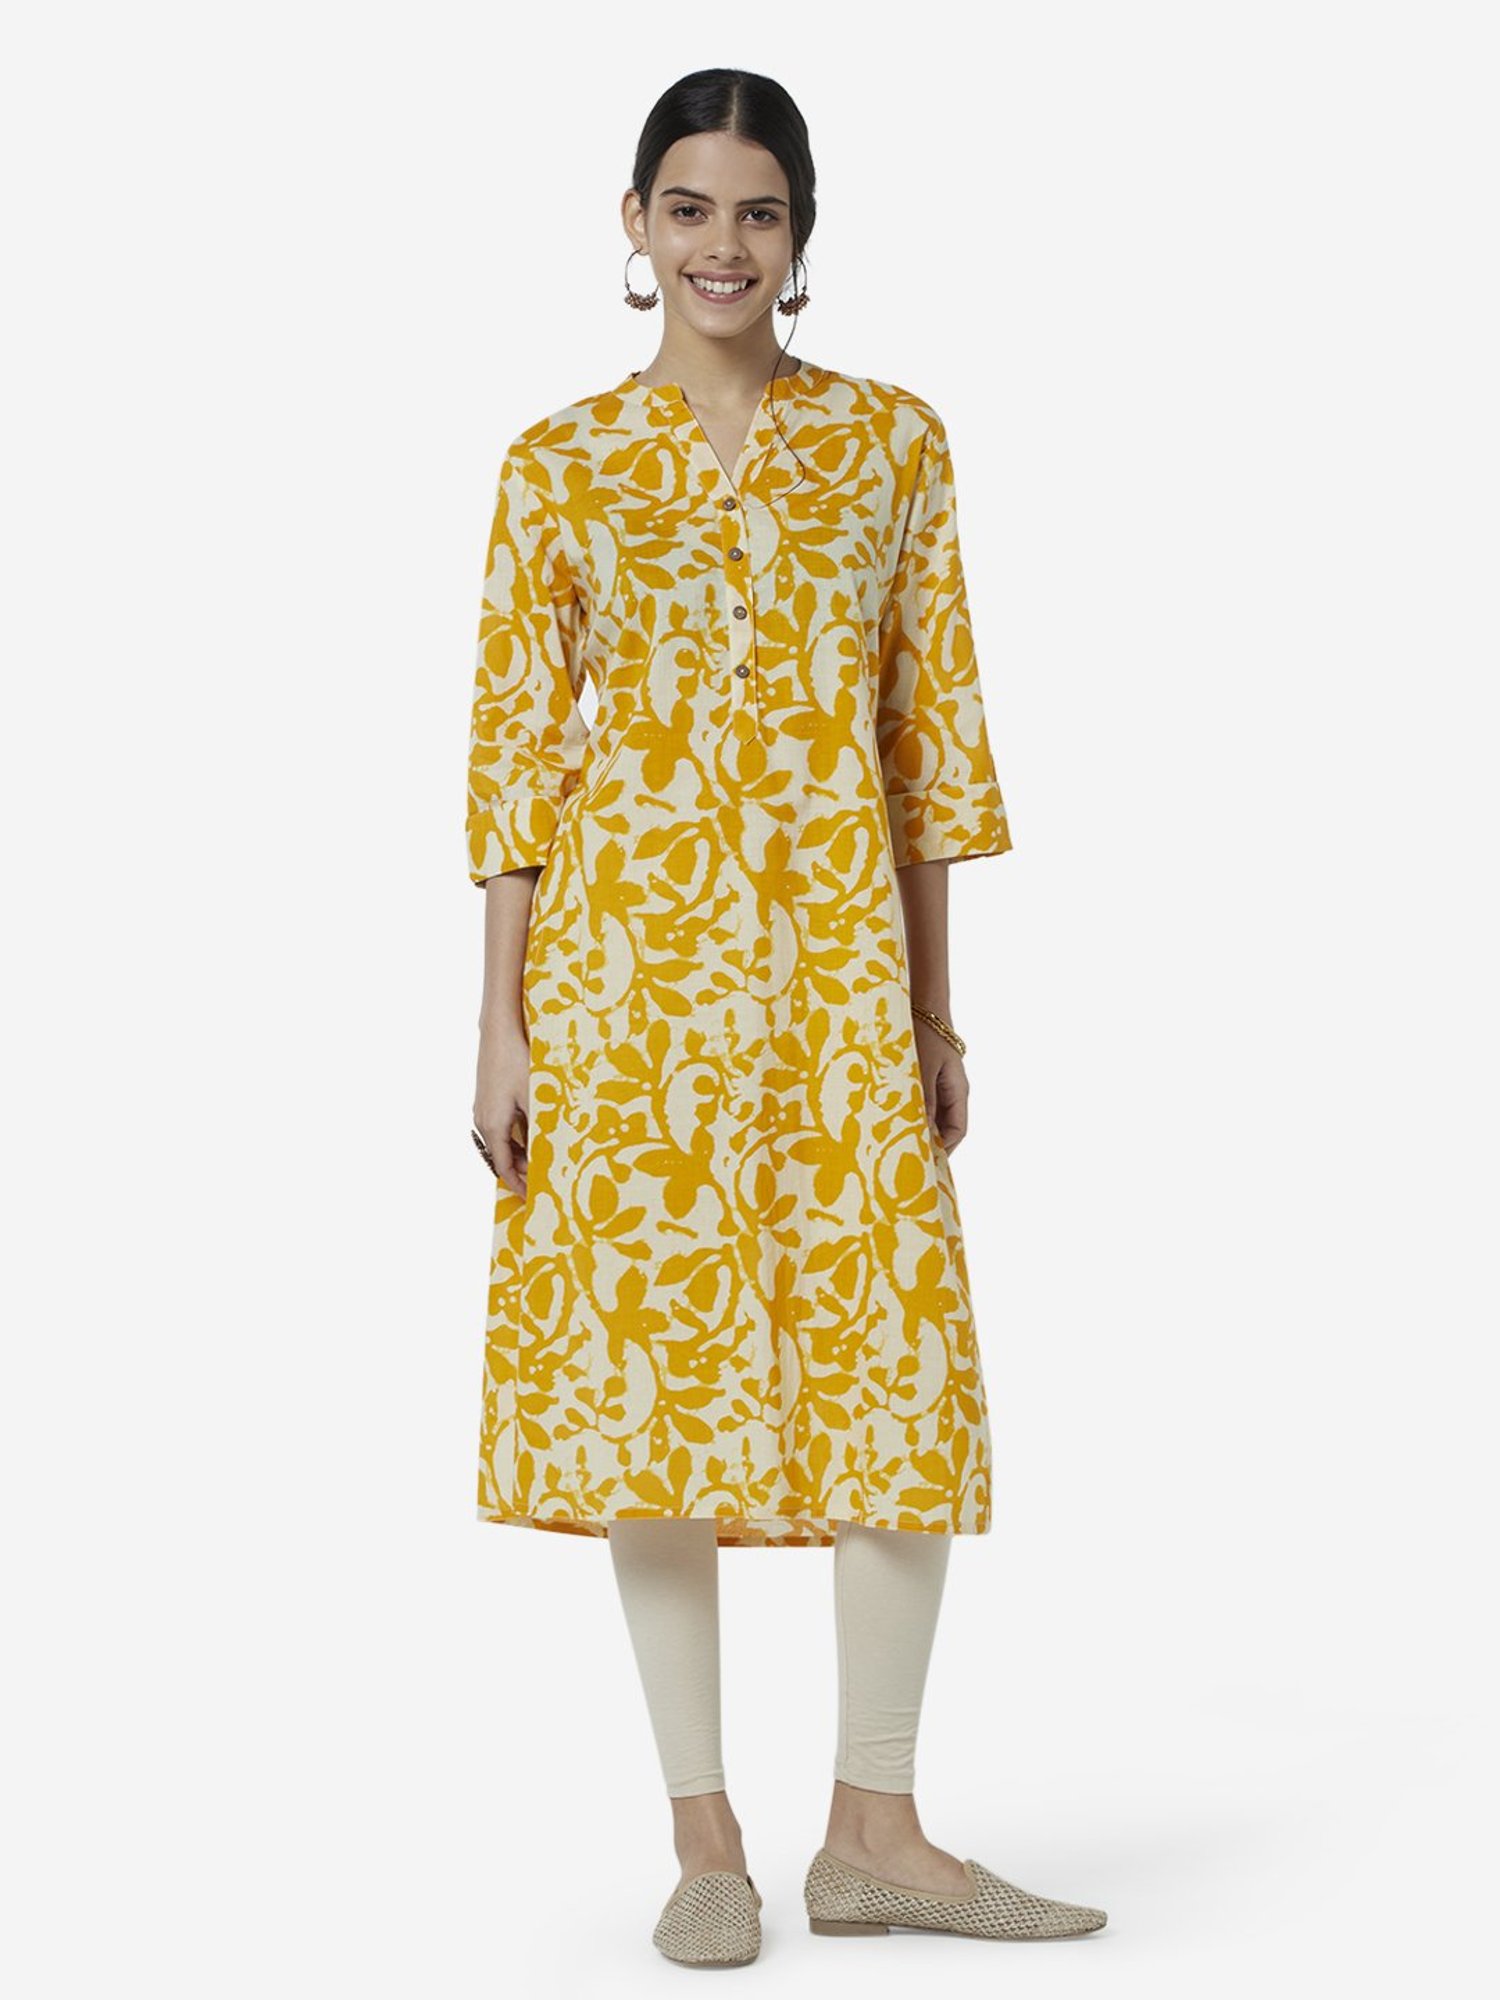 Buy Yellow Ethnic Wear Online in India at Best Price - Westside